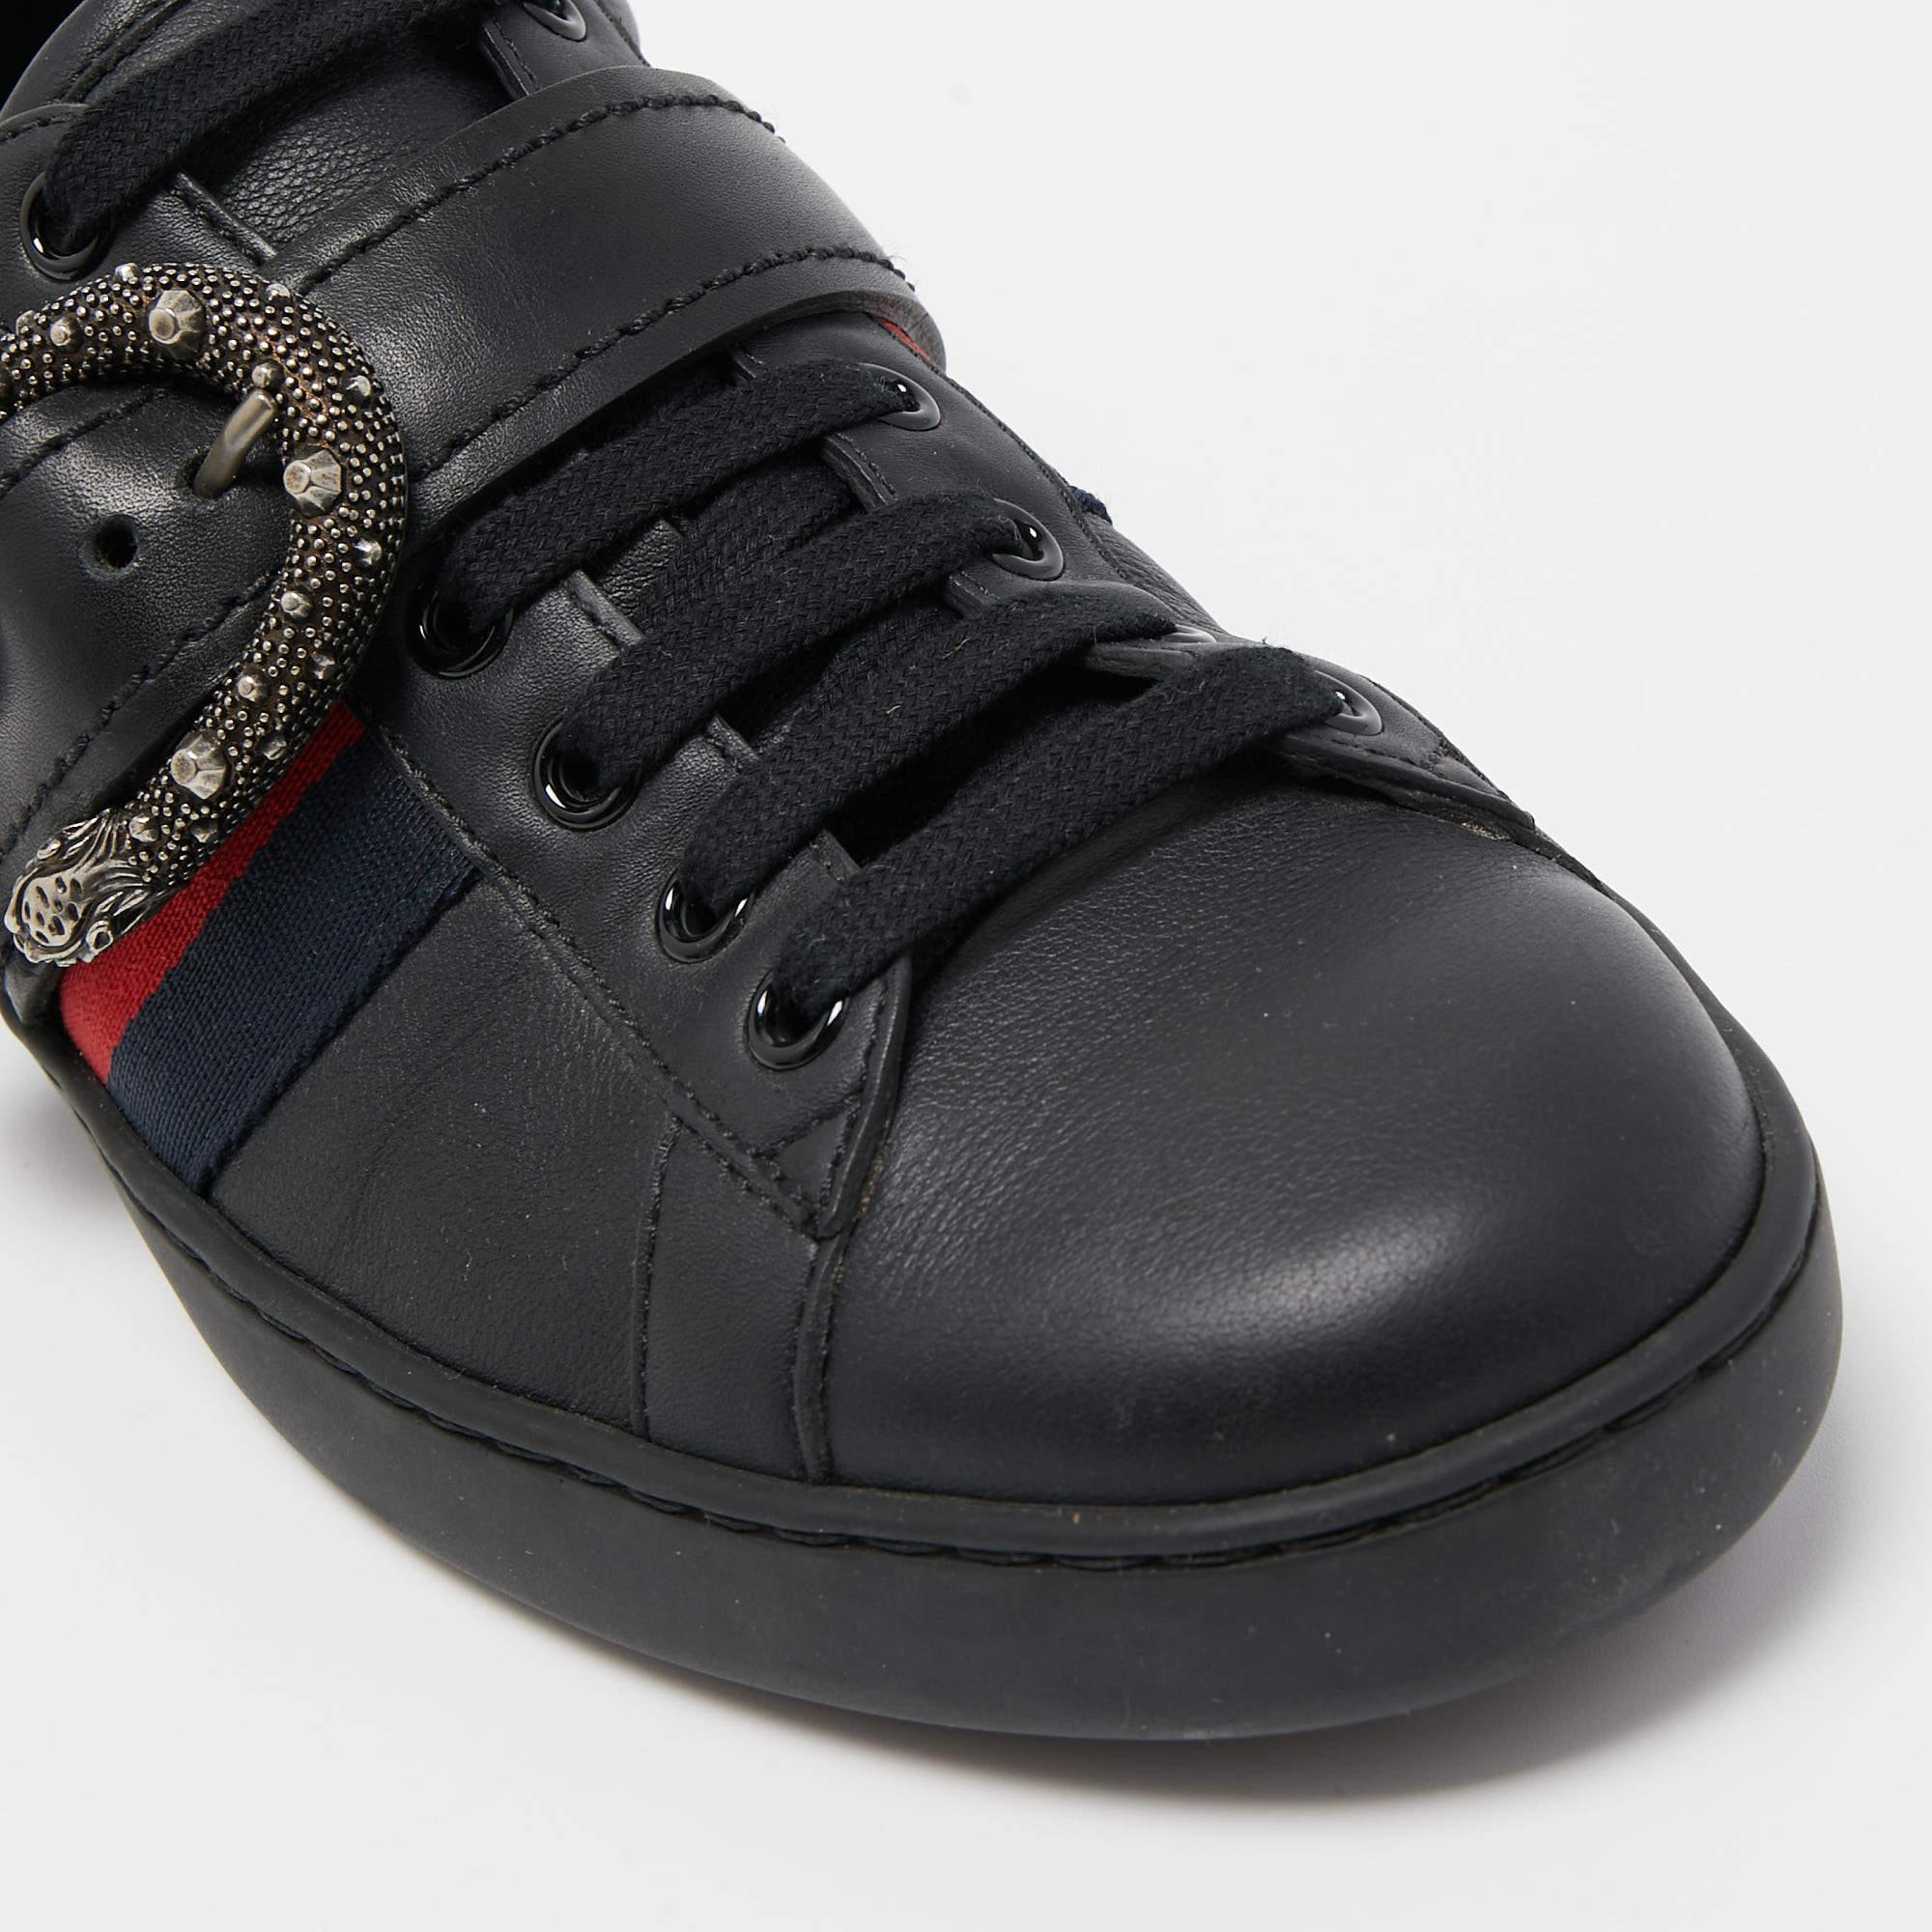 Gucci Black Leather And Python Trim Ace Dionysus Buckle Lace Up Sneakers Size 40 1